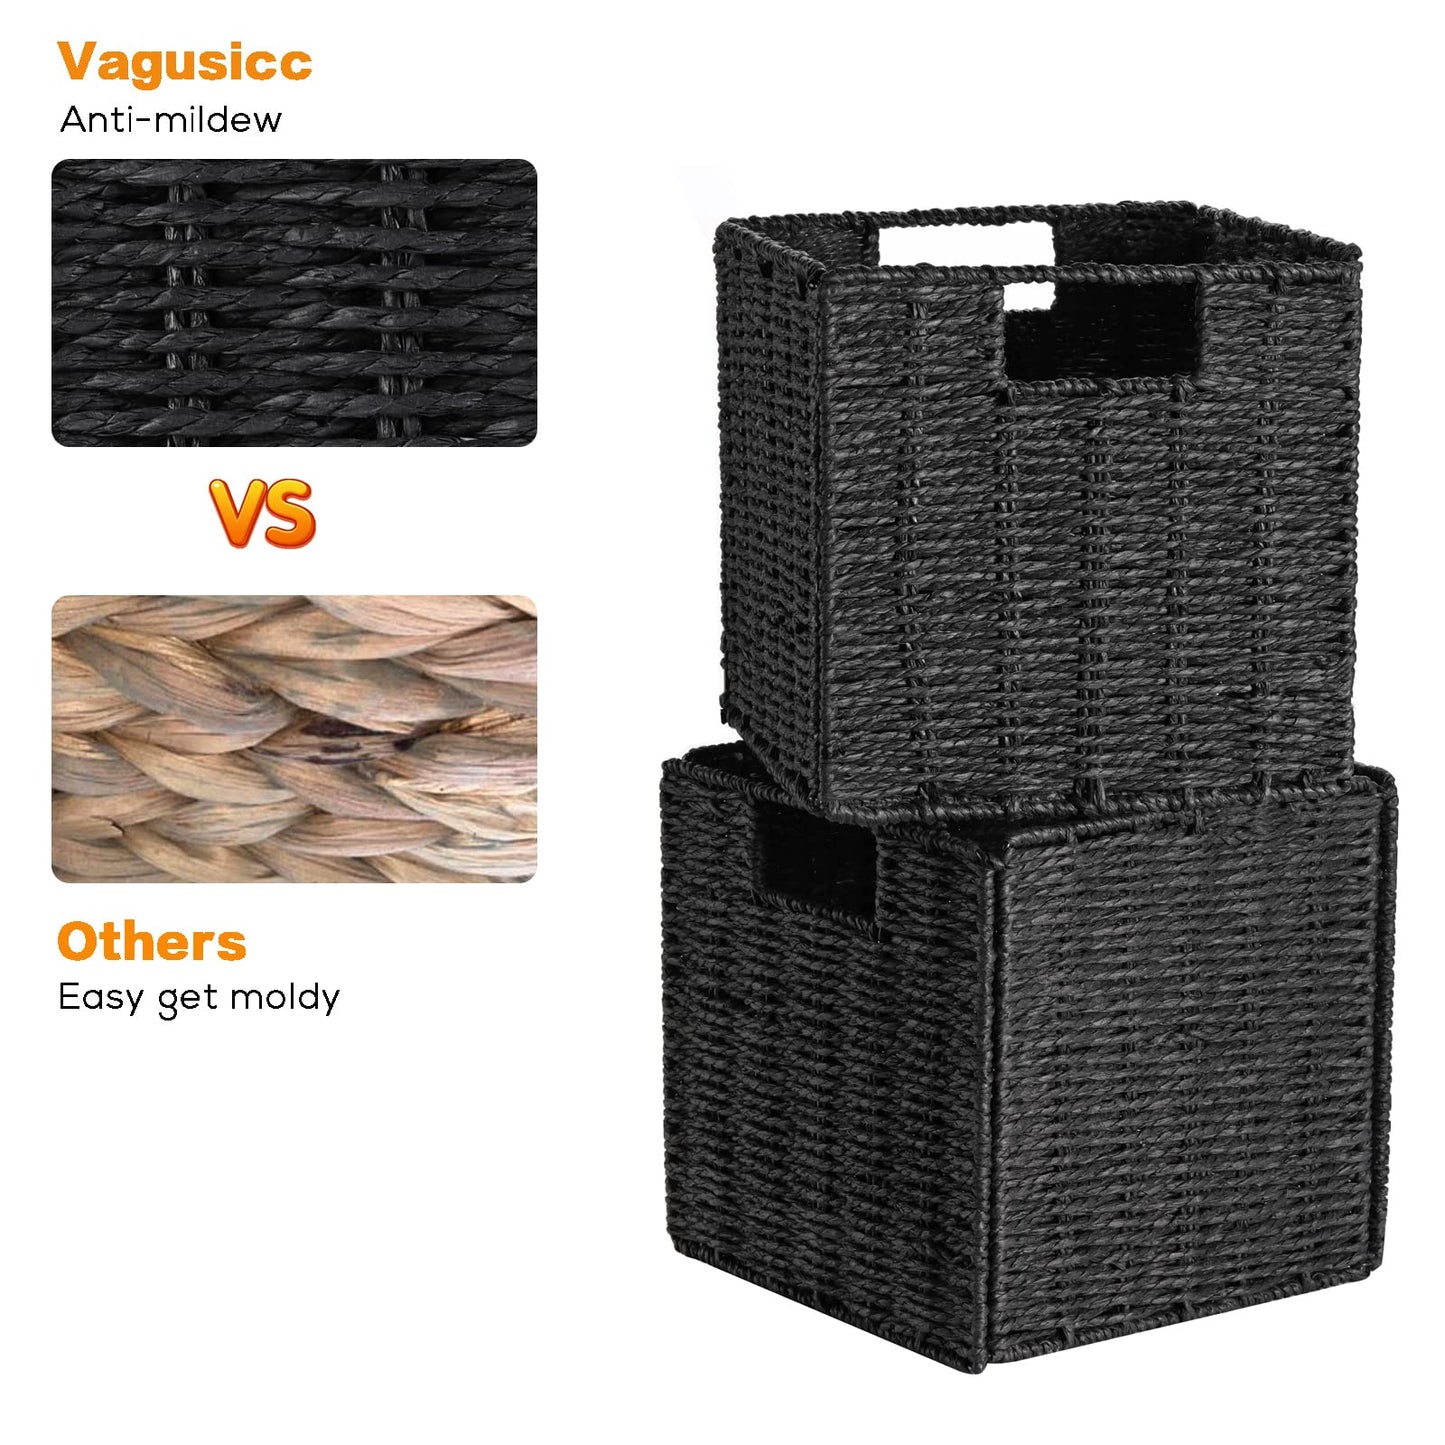 Vagusicc Wicker Baskets for Storage, Set of 2 Hand-Woven Storage Baskets for Shelves, Foldable Cube Storage Baskets Bins with Handles, 9 inch Small Wicker Baskets for Organizing Pantry Bedroom, Black